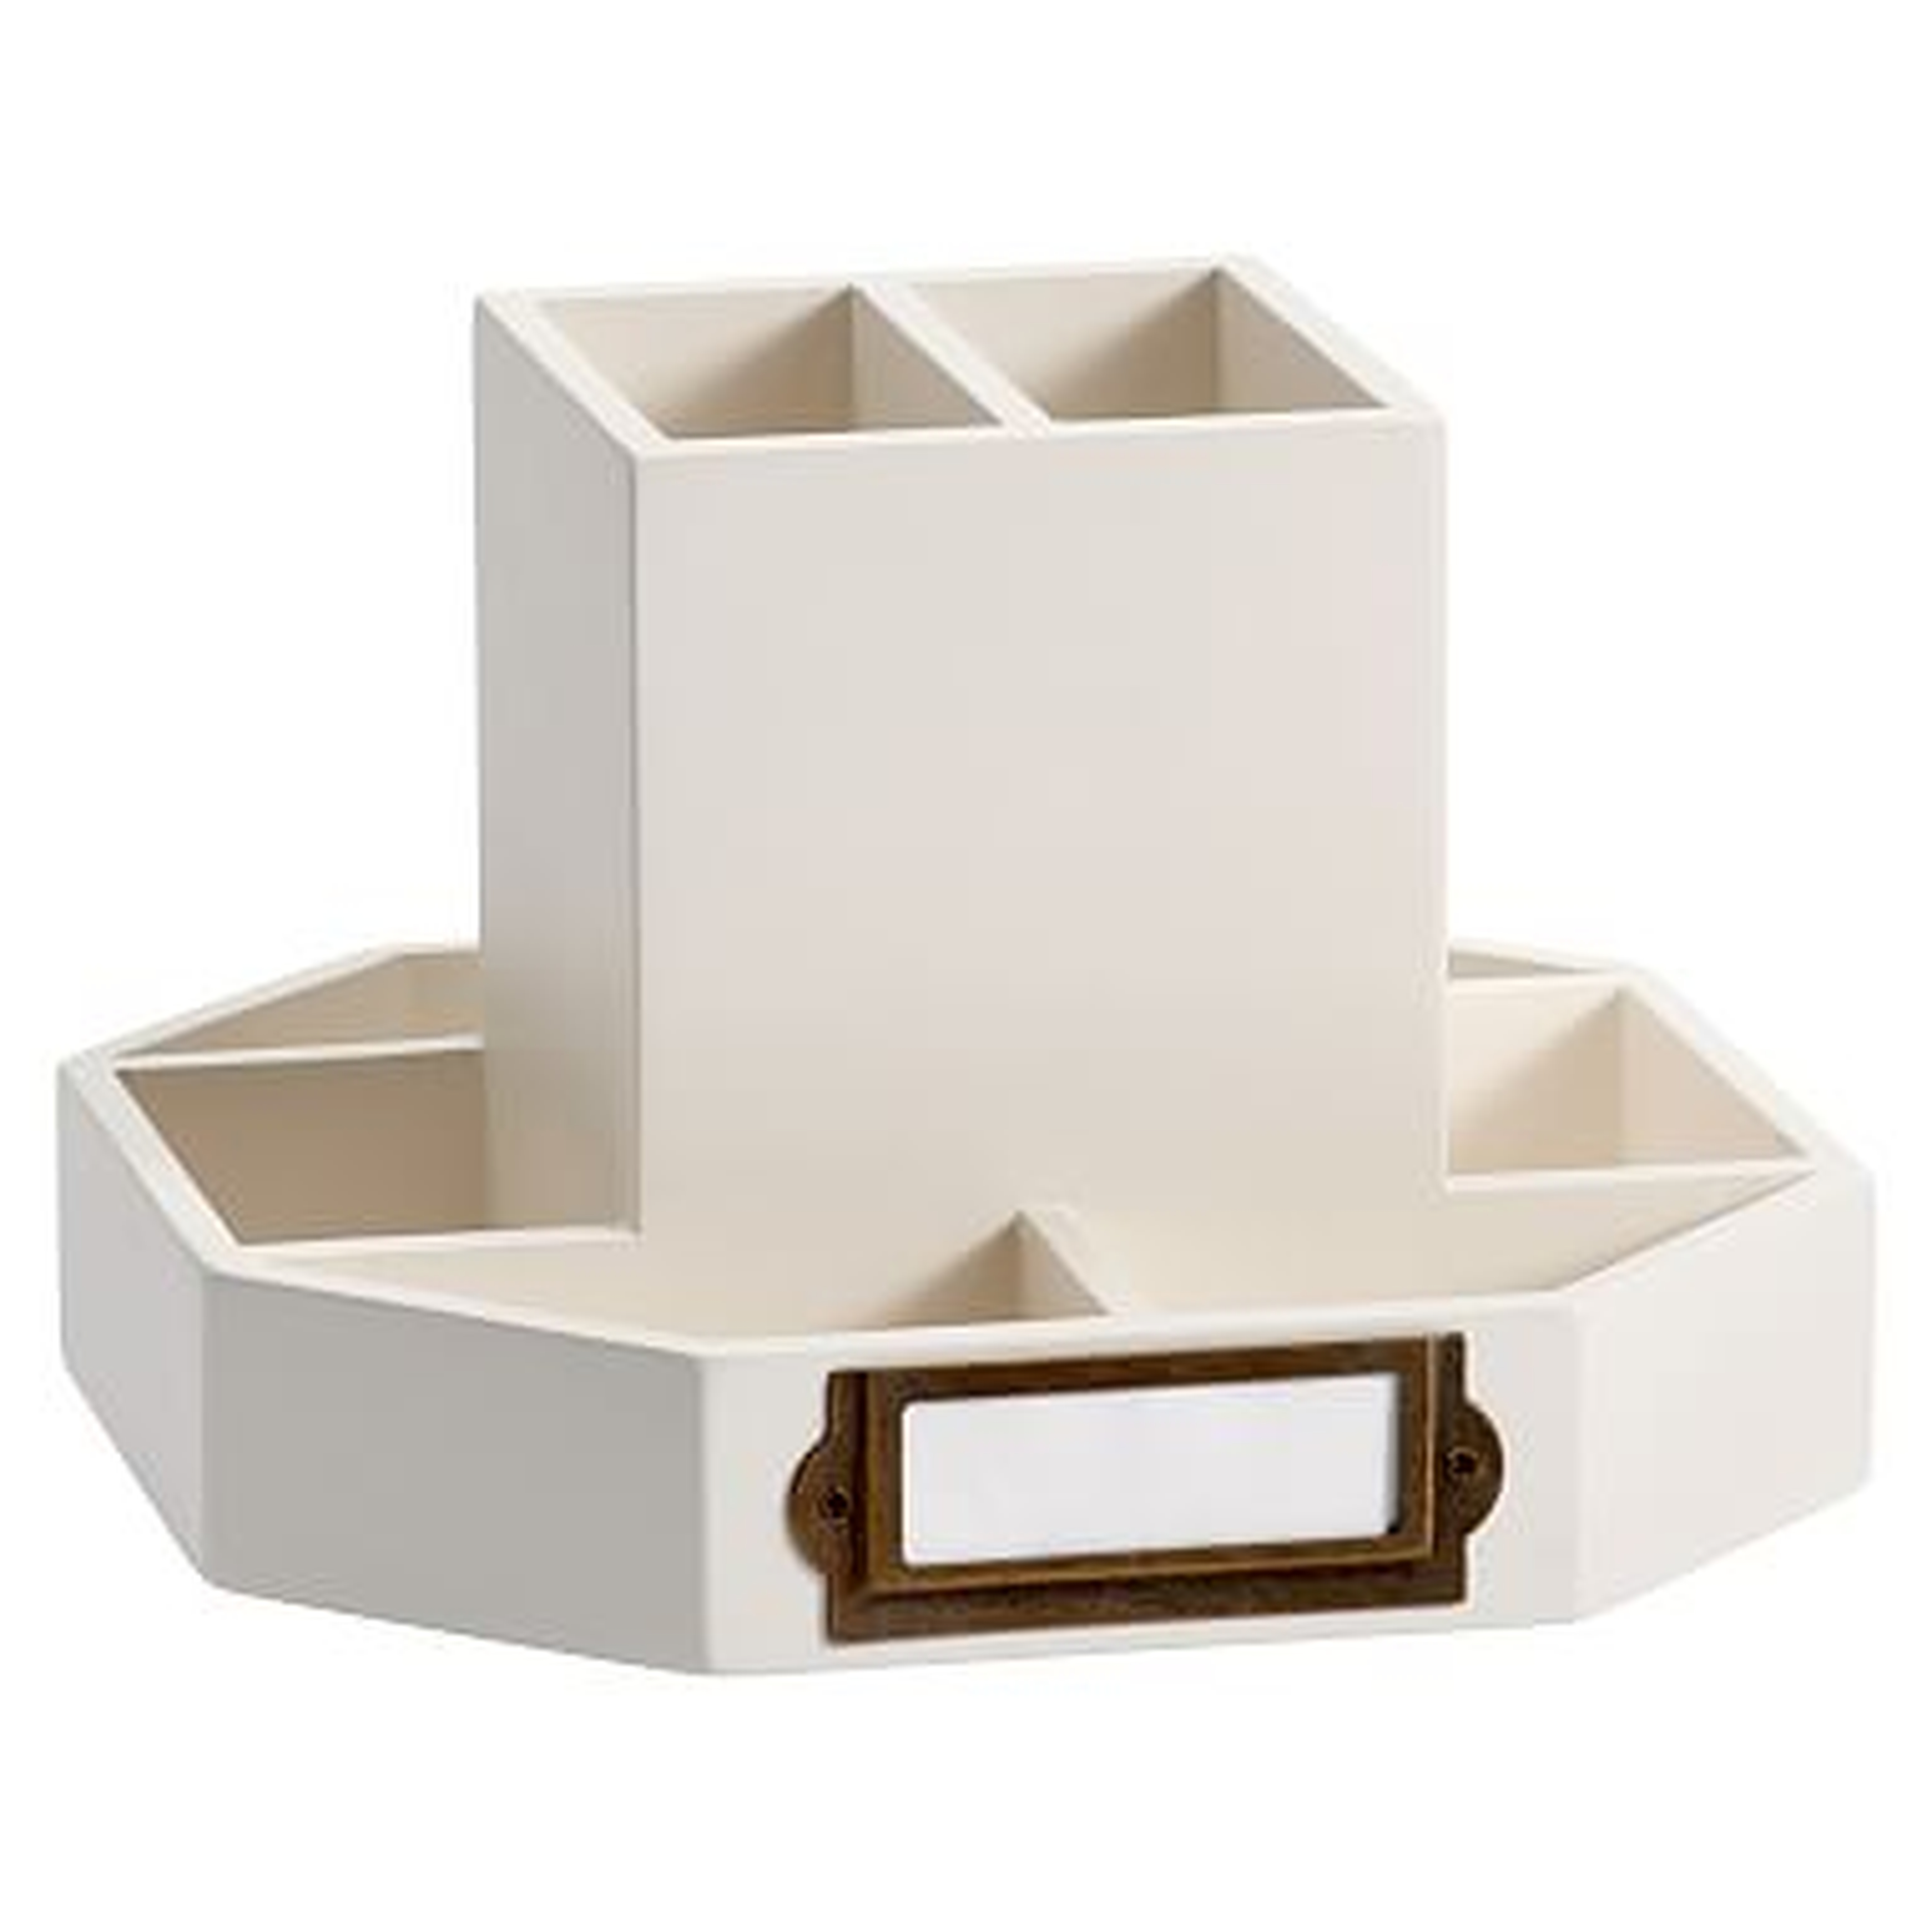 Classic Wooden Desk Accessories, Rotating Caddy, Simply White - Pottery Barn Teen